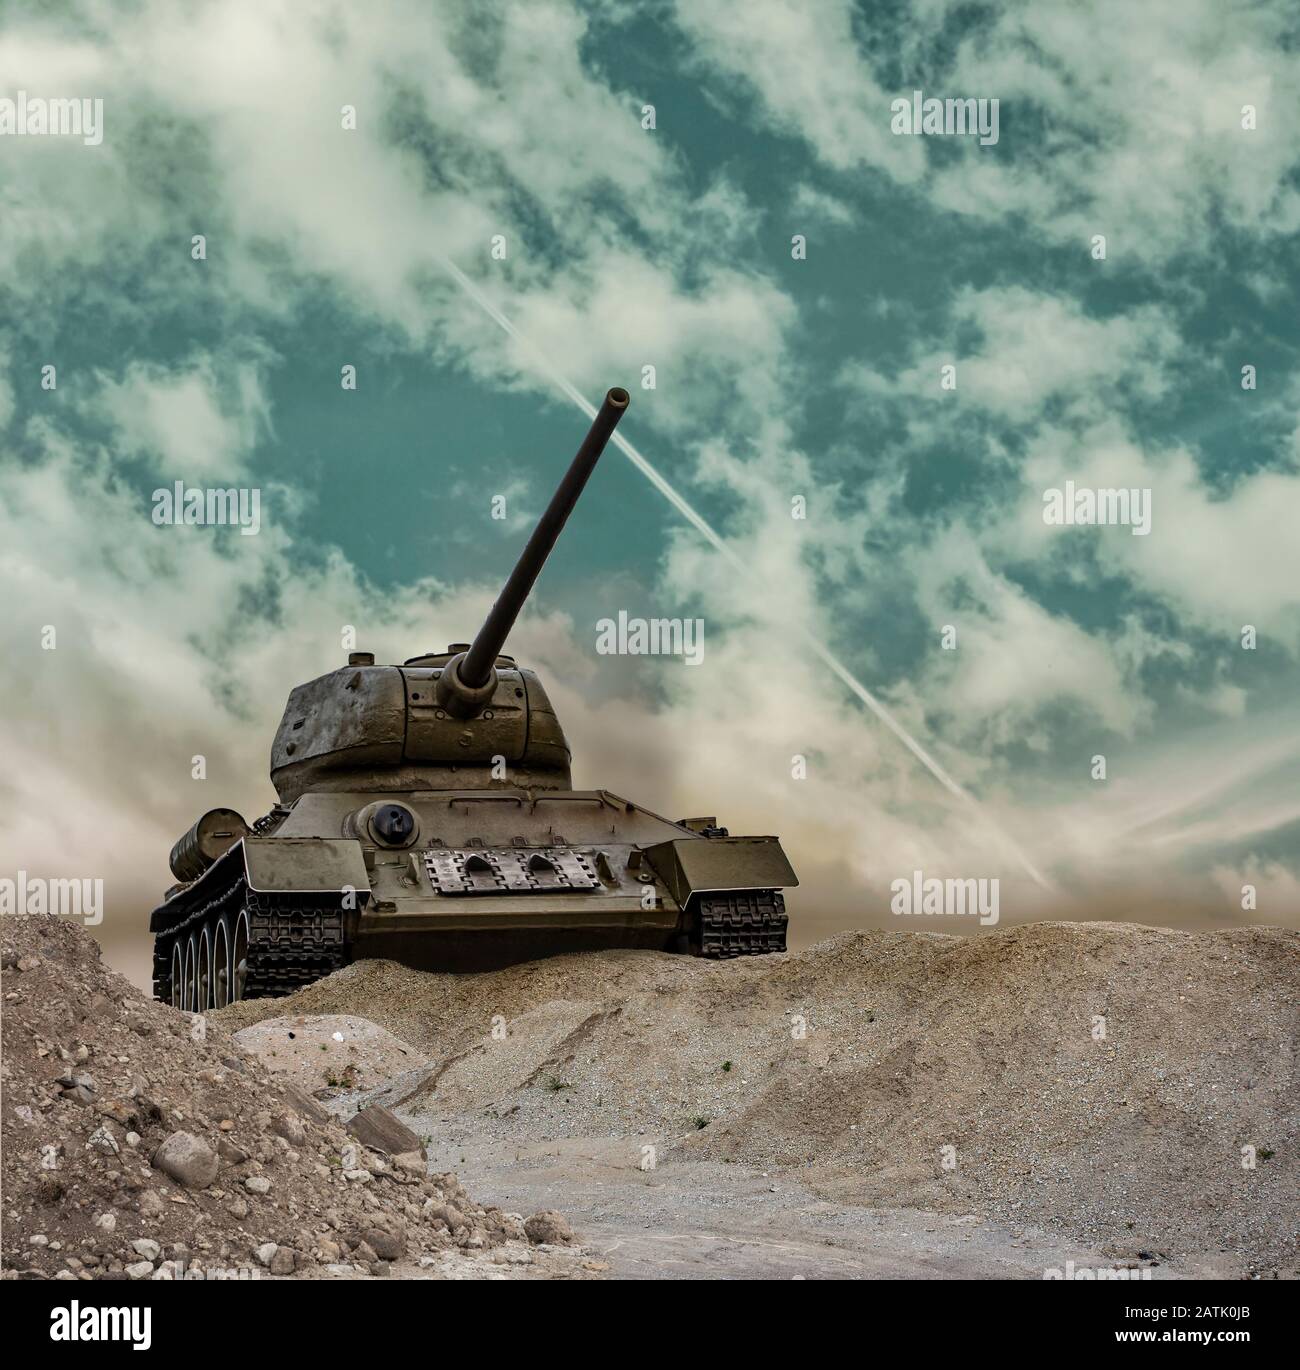 A tank front side approaching and aiming on a dramatic cloudy summer sky background Stock Photo